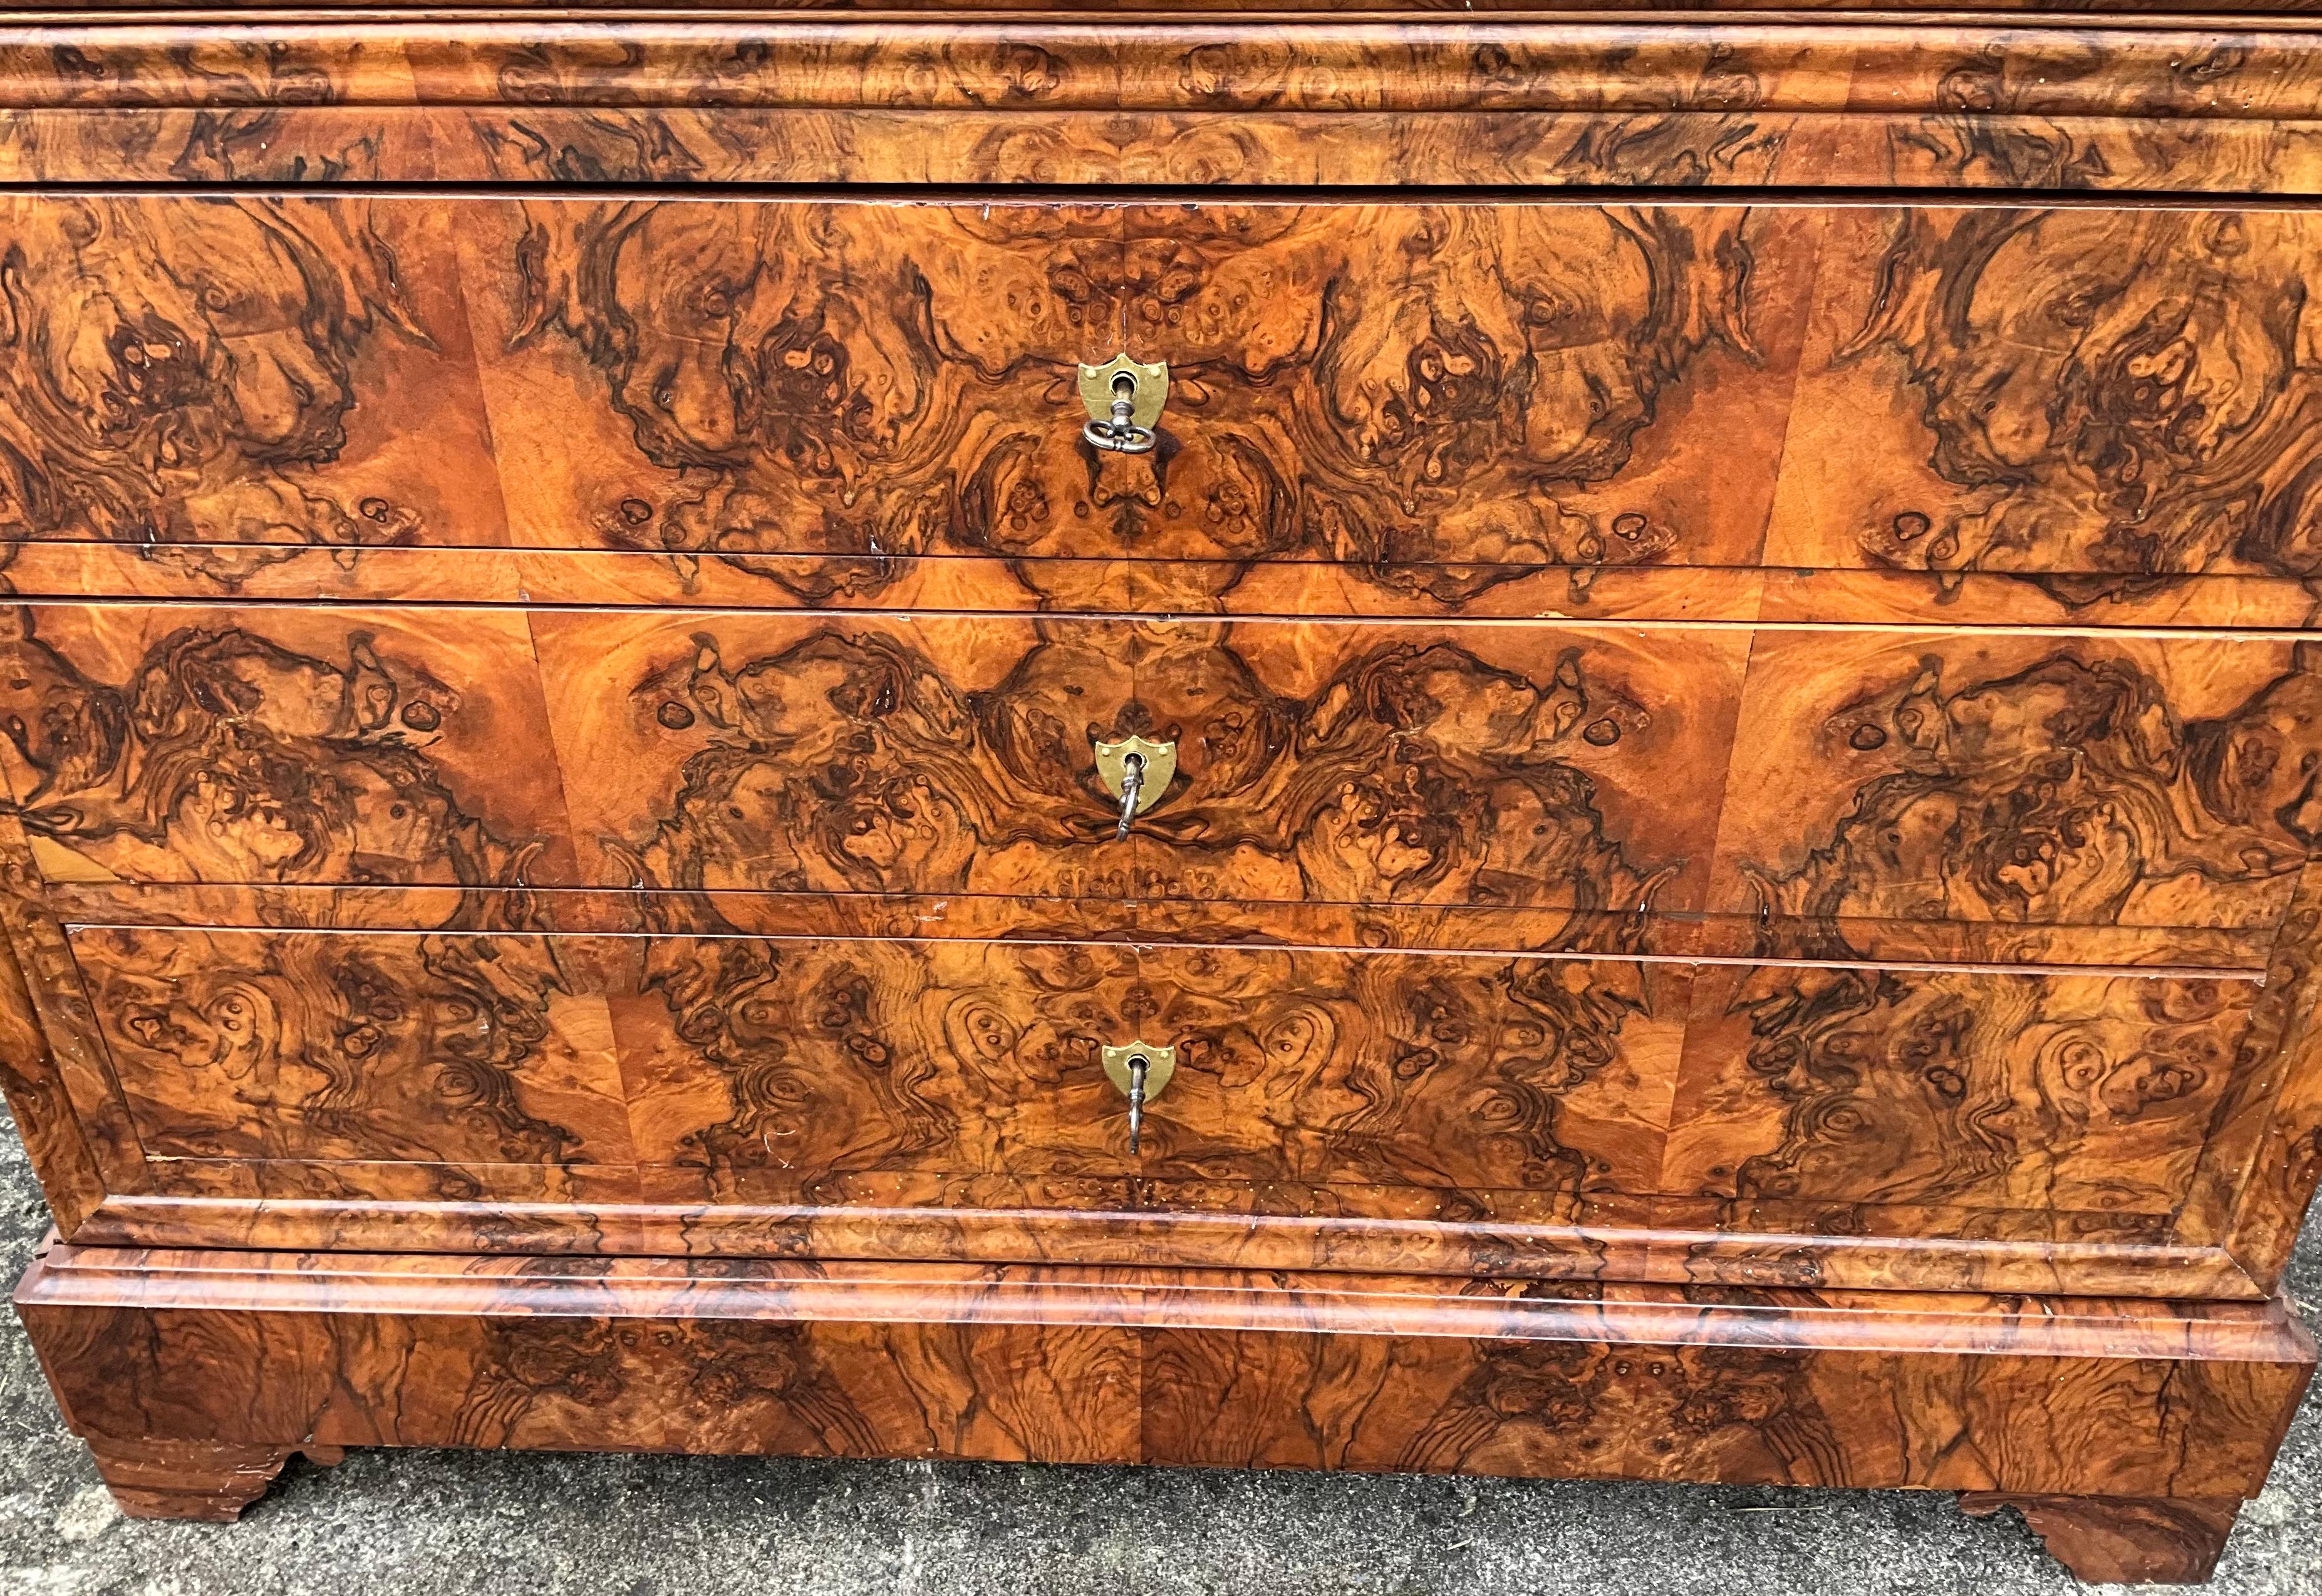 Louis Philippe 19th century French chest of drawers. The wood is in walnut bramble.
Walnut brambles are flamed because they have many aesthetic designs. These drawings have complex patterns with high contrast and entangled veins on a naturally dark